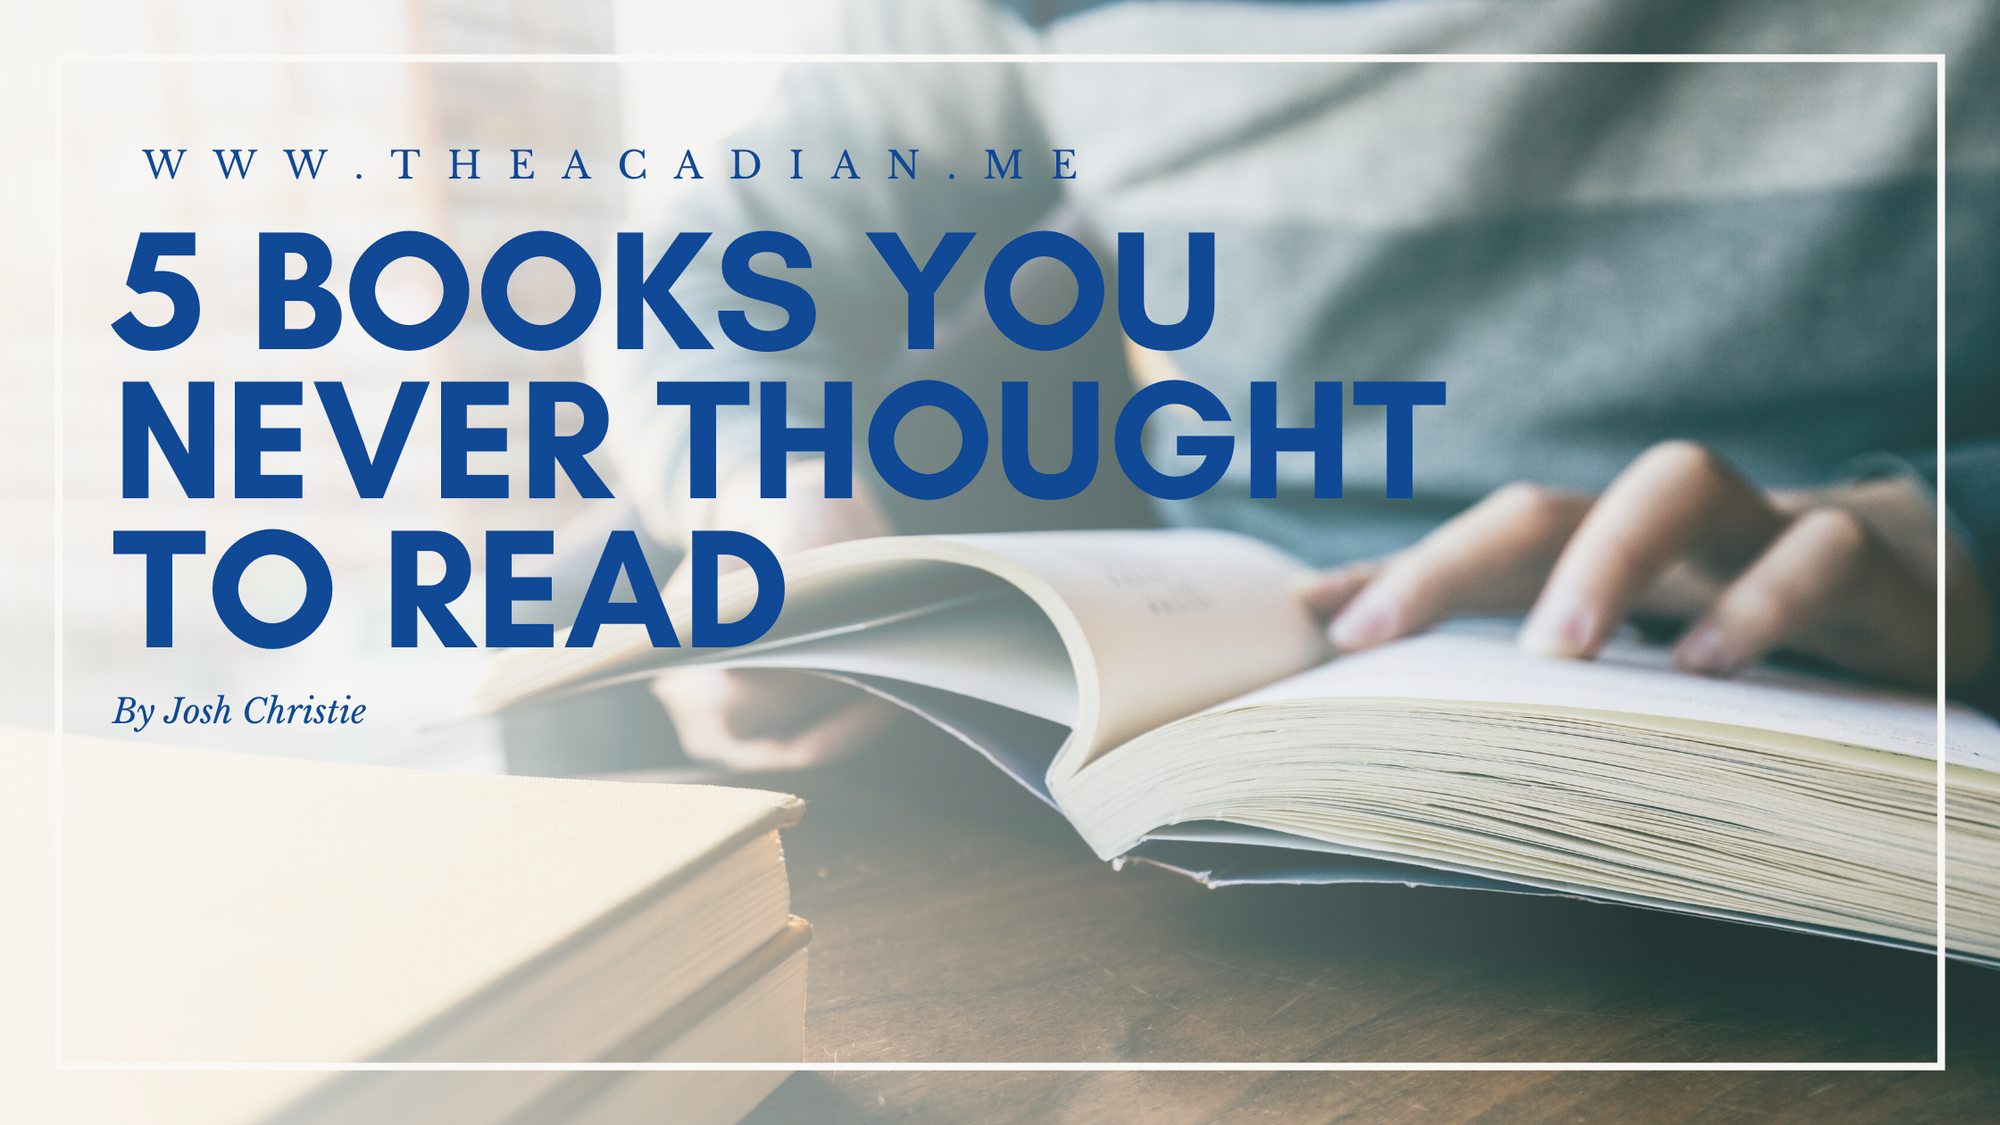 5 Books You Never Thought To Read